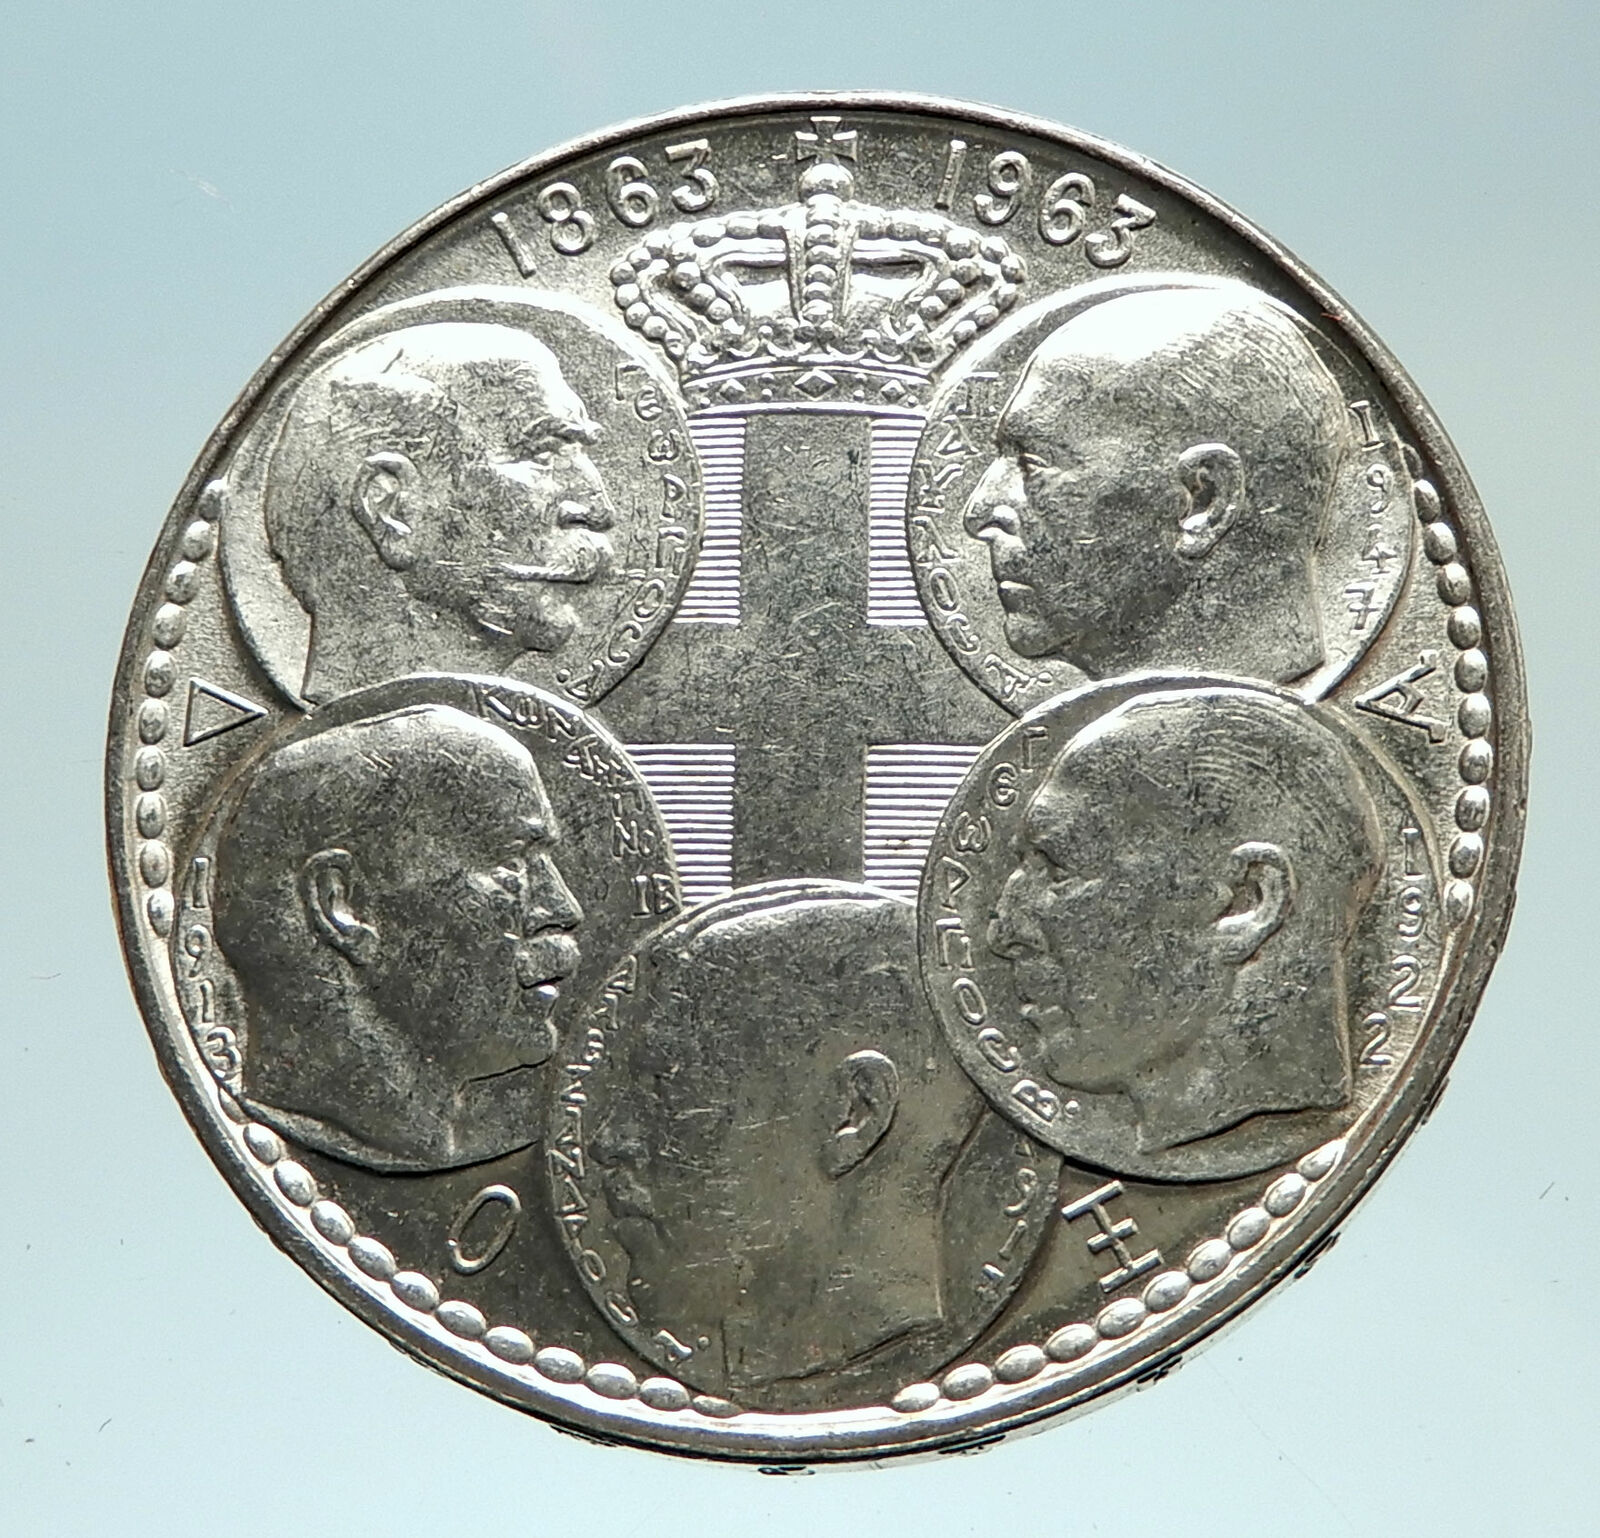 1963 GREECE w PAUL GEORGE I &II ALEXANDER CONSTANTINE Antique Silver Coin i76826